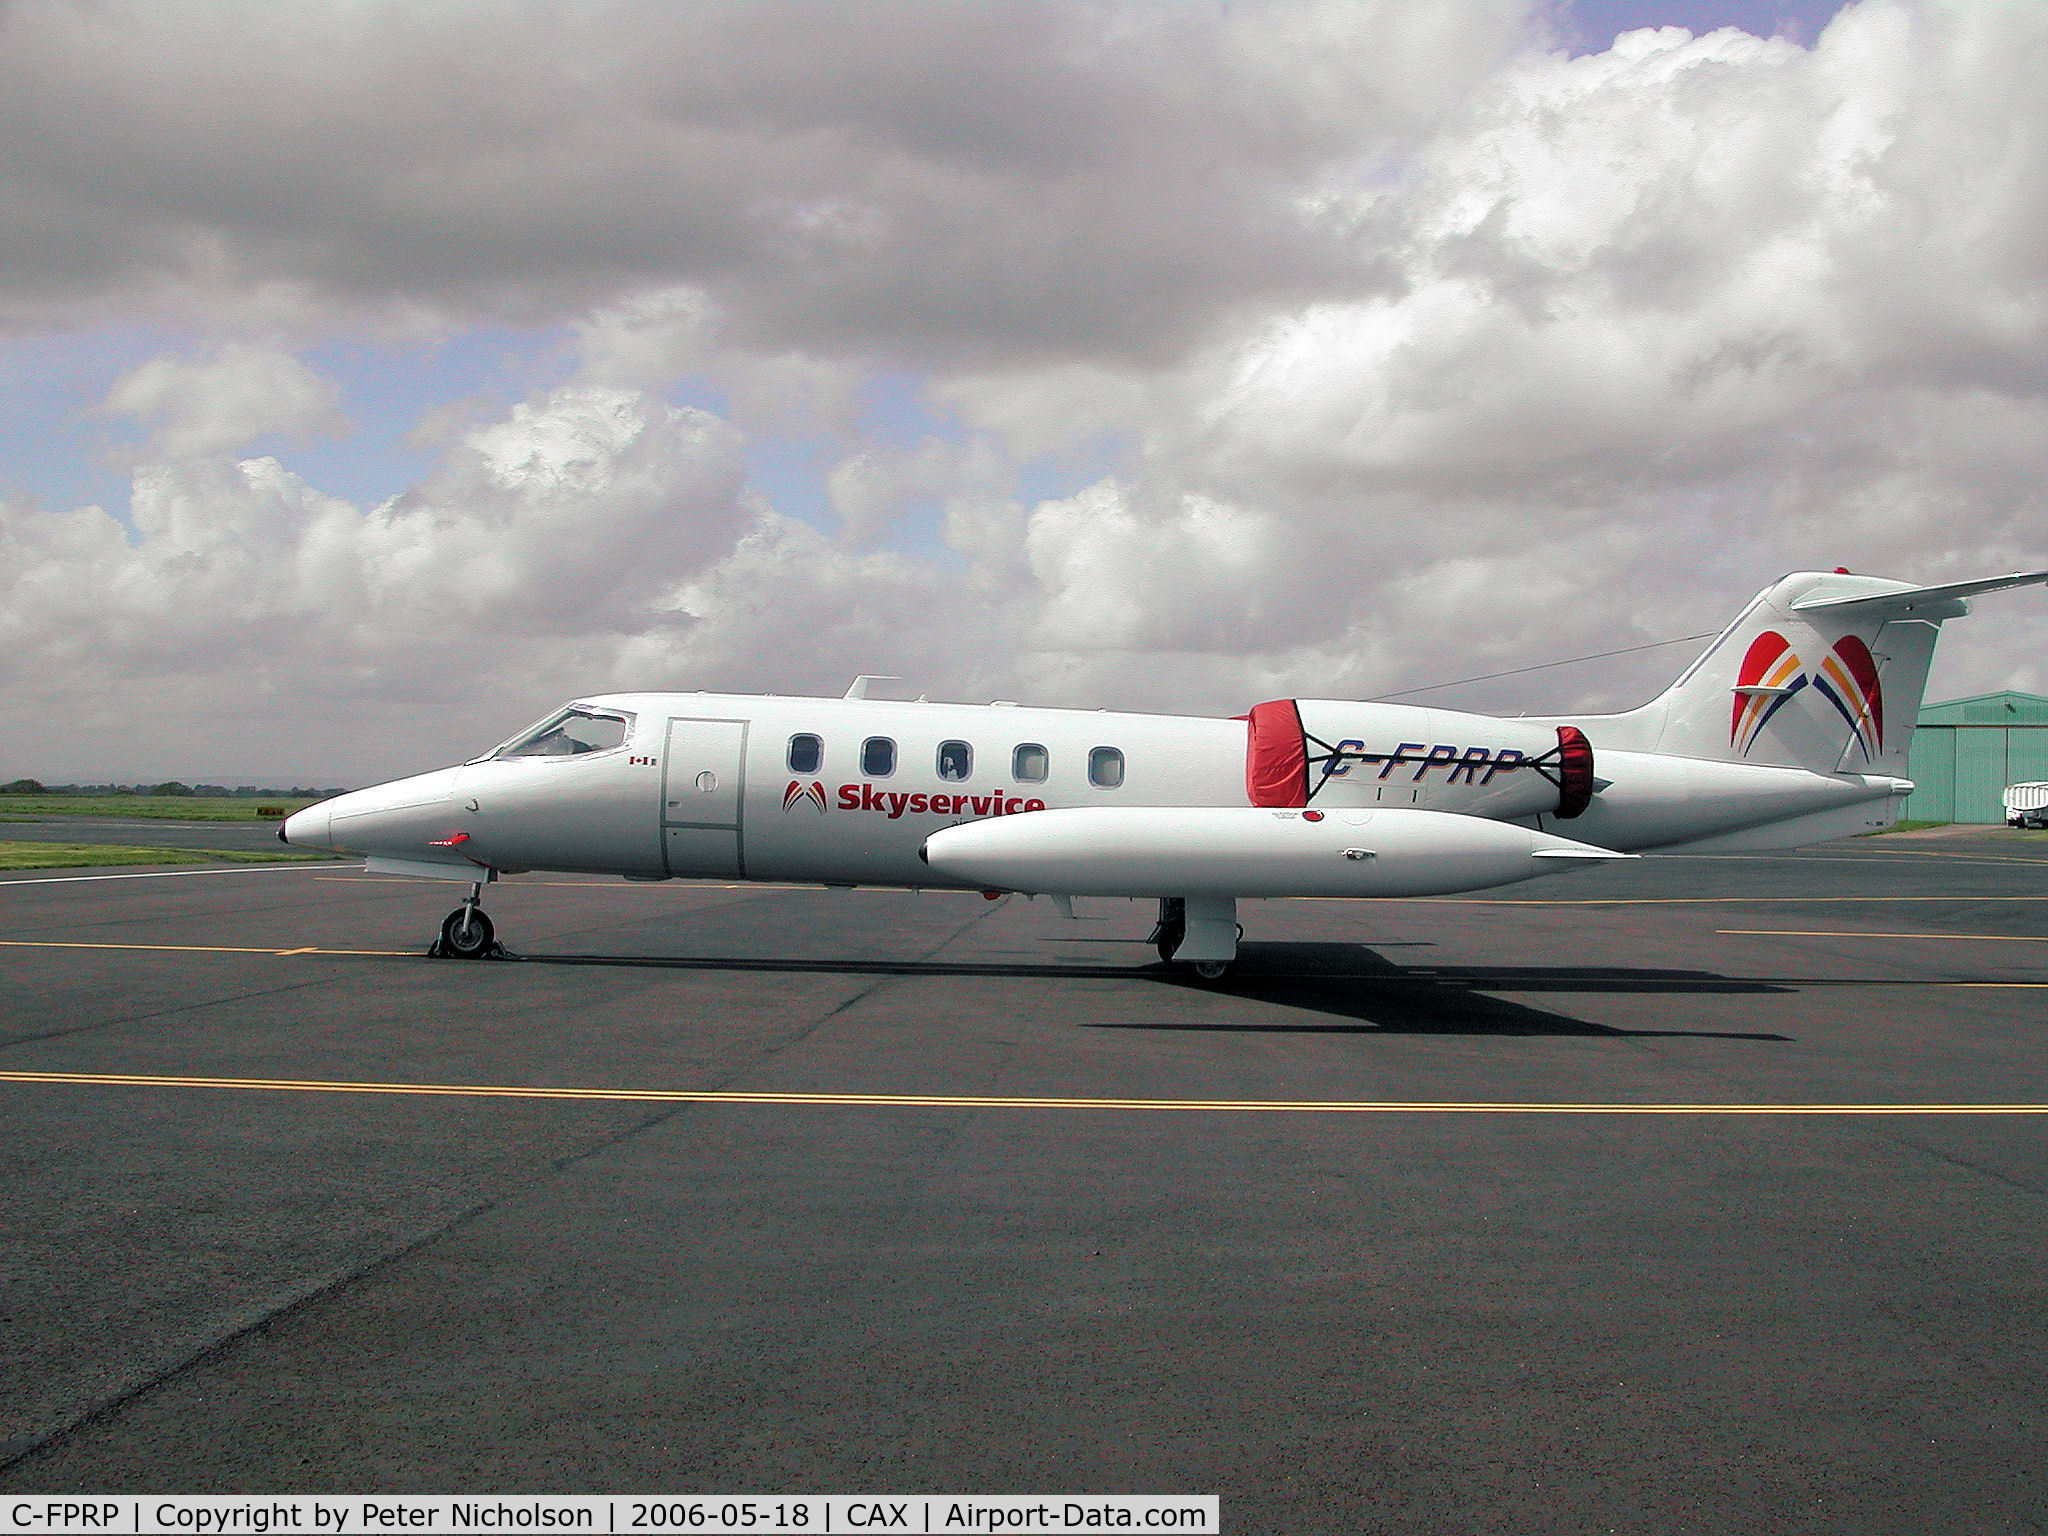 C-FPRP, 1981 Learjet 35A C/N 390, Learjet 35A Skyservice ambulance as seen at Carlisle in May 2006.